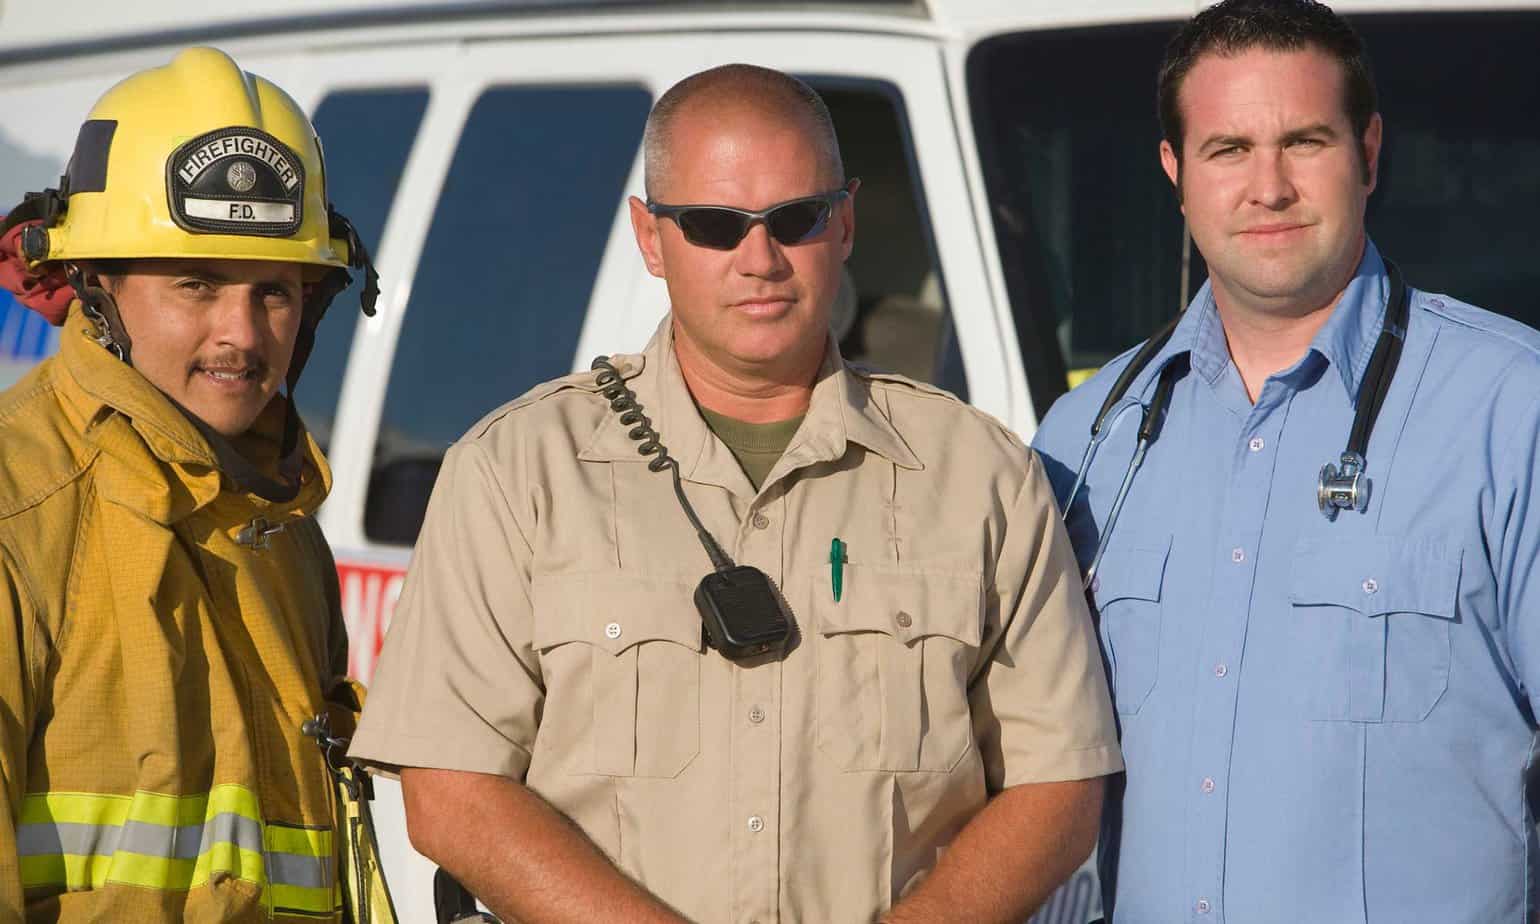 First Responders and Mental Health: When Heroes Need Help